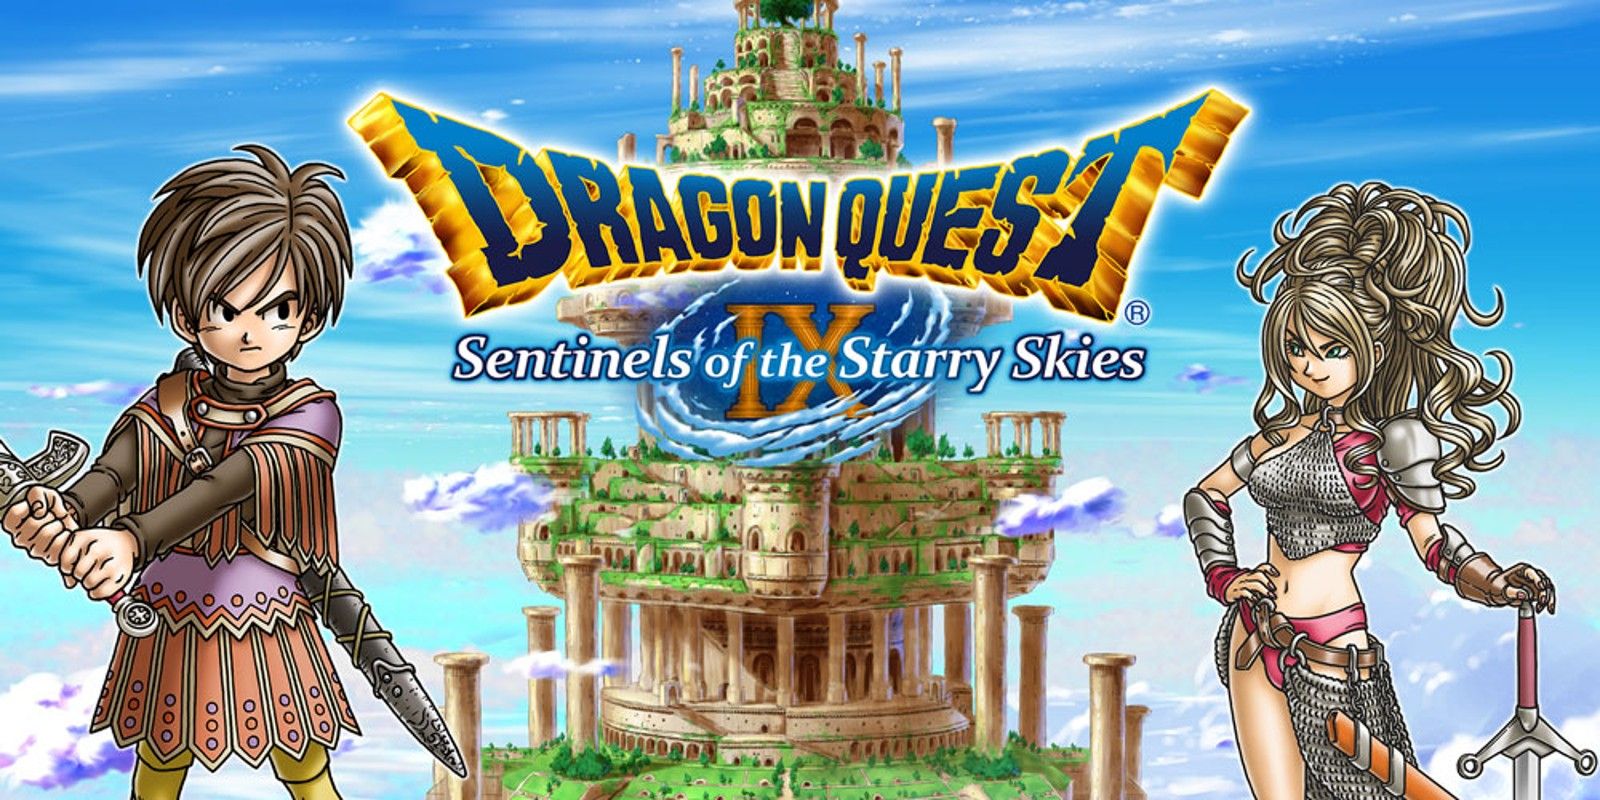 A boy holds a sword while a girl leans on hers in Dragon Quest IX: Sentinels of the Starry Skies.